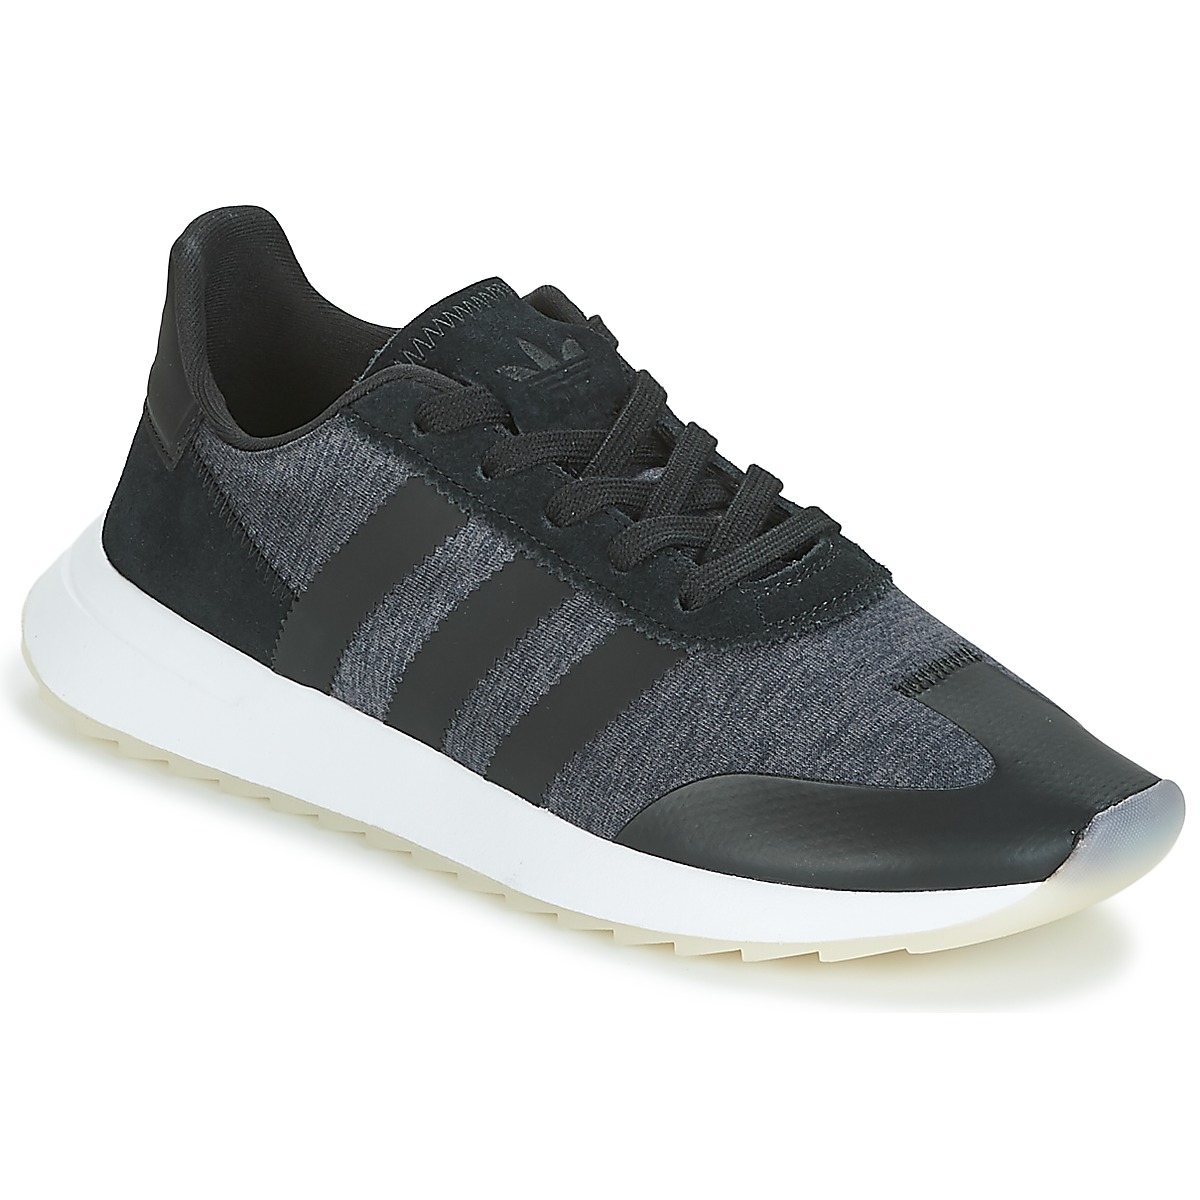 adidas Originals FLB RUNNER W Black - Fast delivery | Spartoo Europe - Shoes top trainers 79,20 €